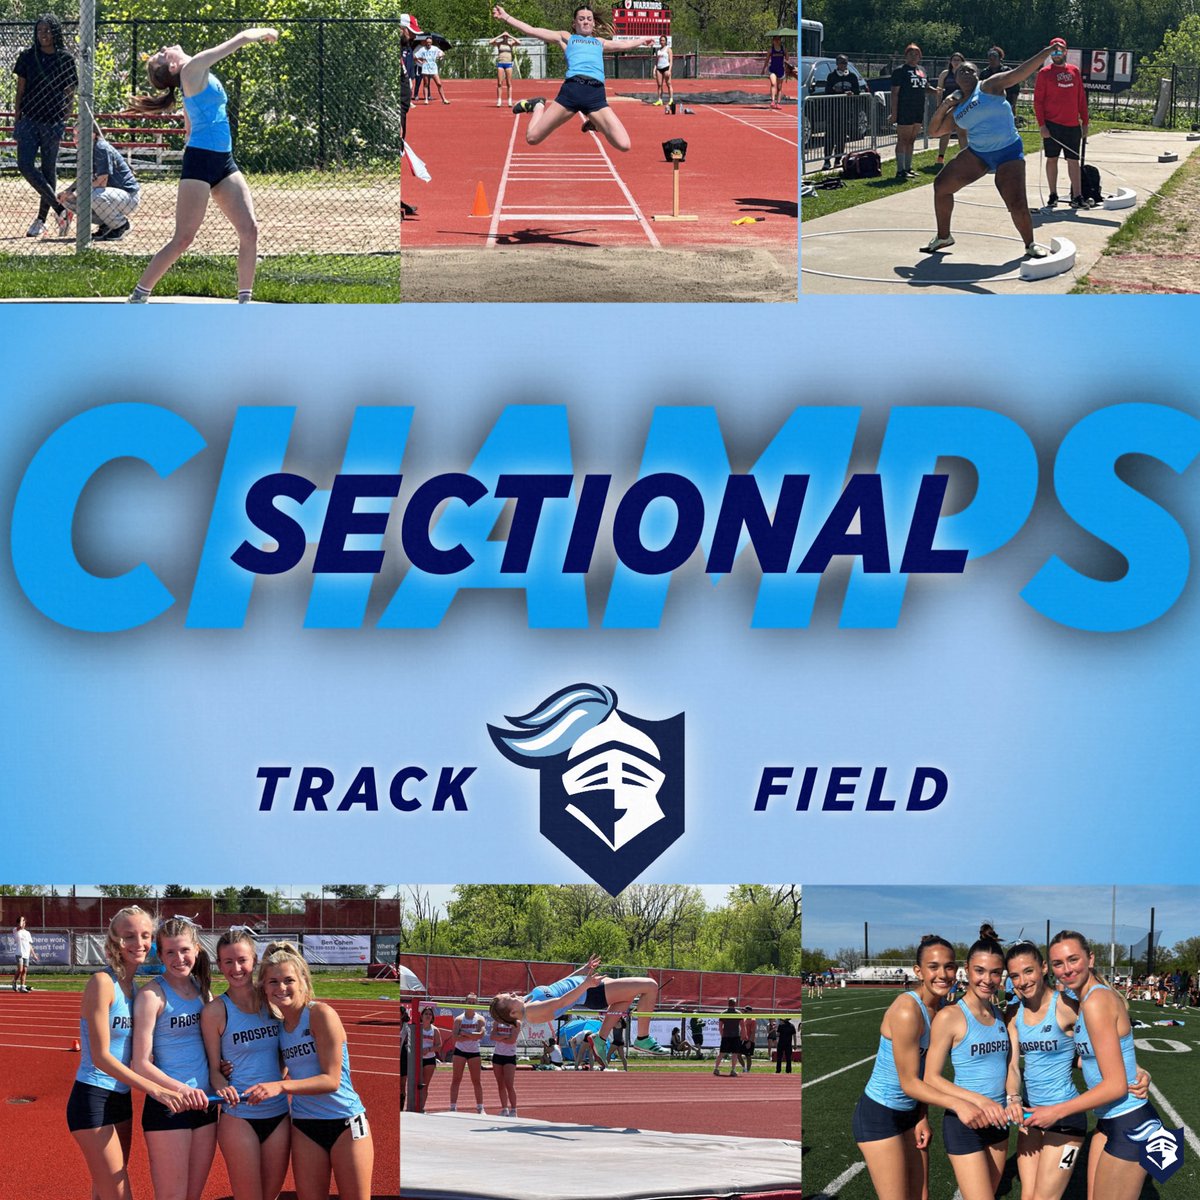 Incredible performance by the Knights- Sectional Champions and qualifying 20 entries to state.